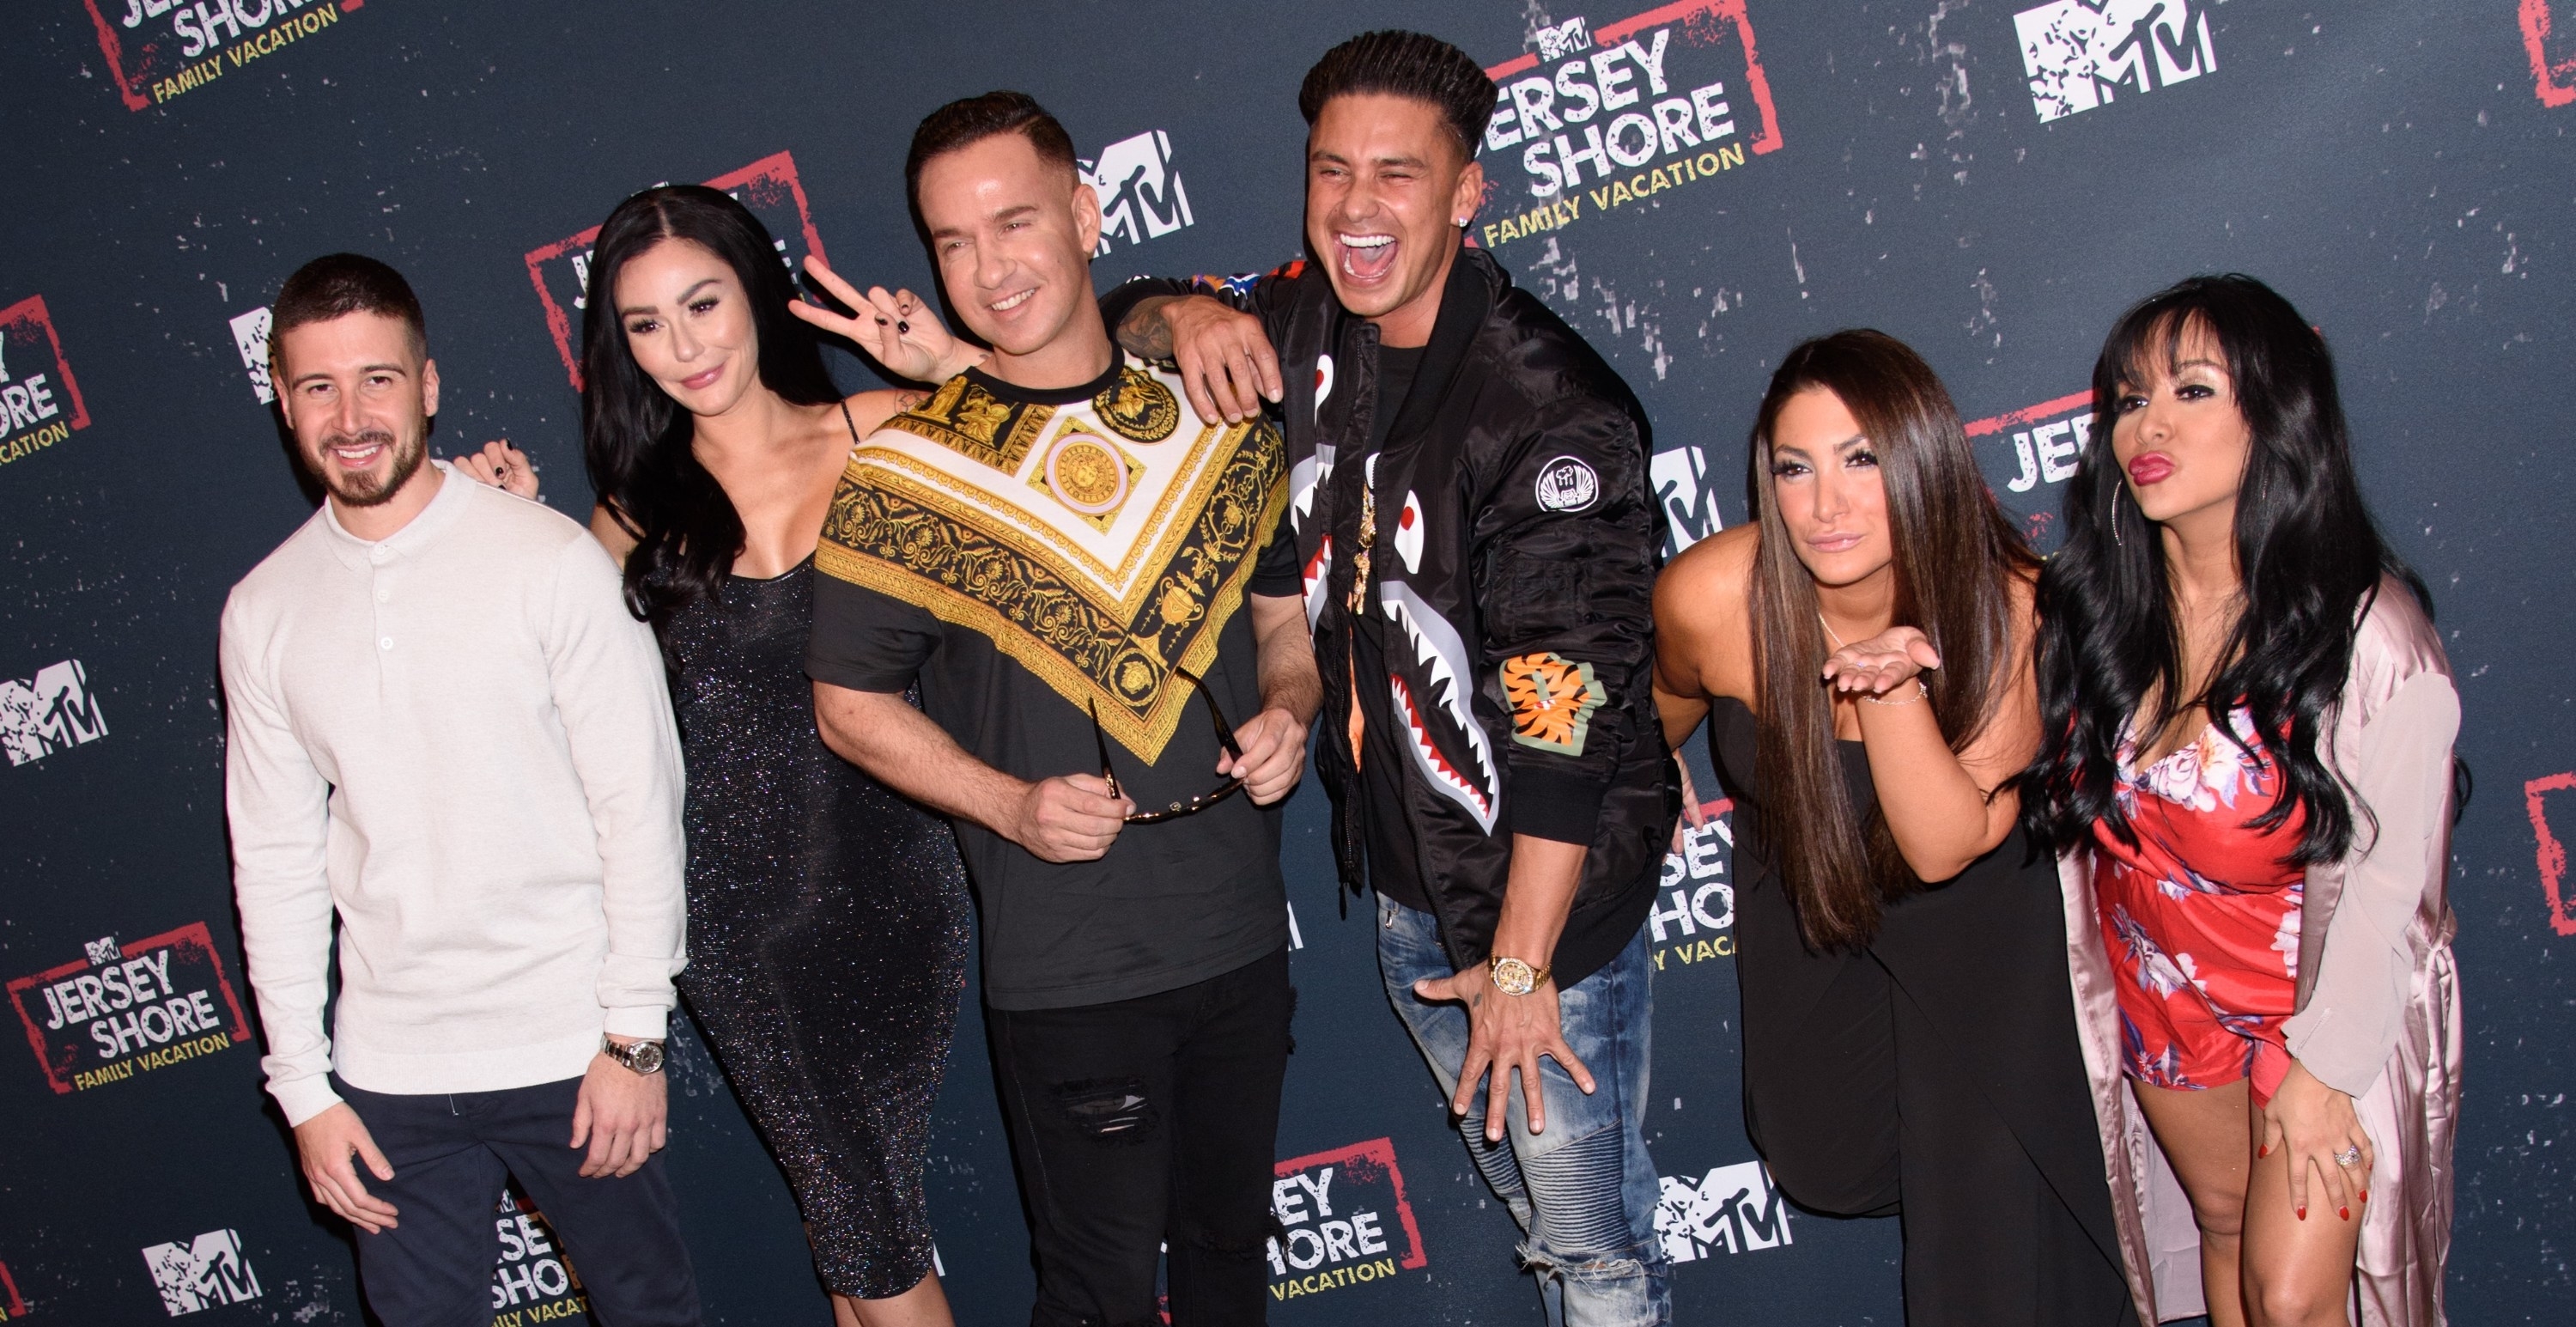 Cast of Jersey Shore posing together at event, with one holding a championship belt